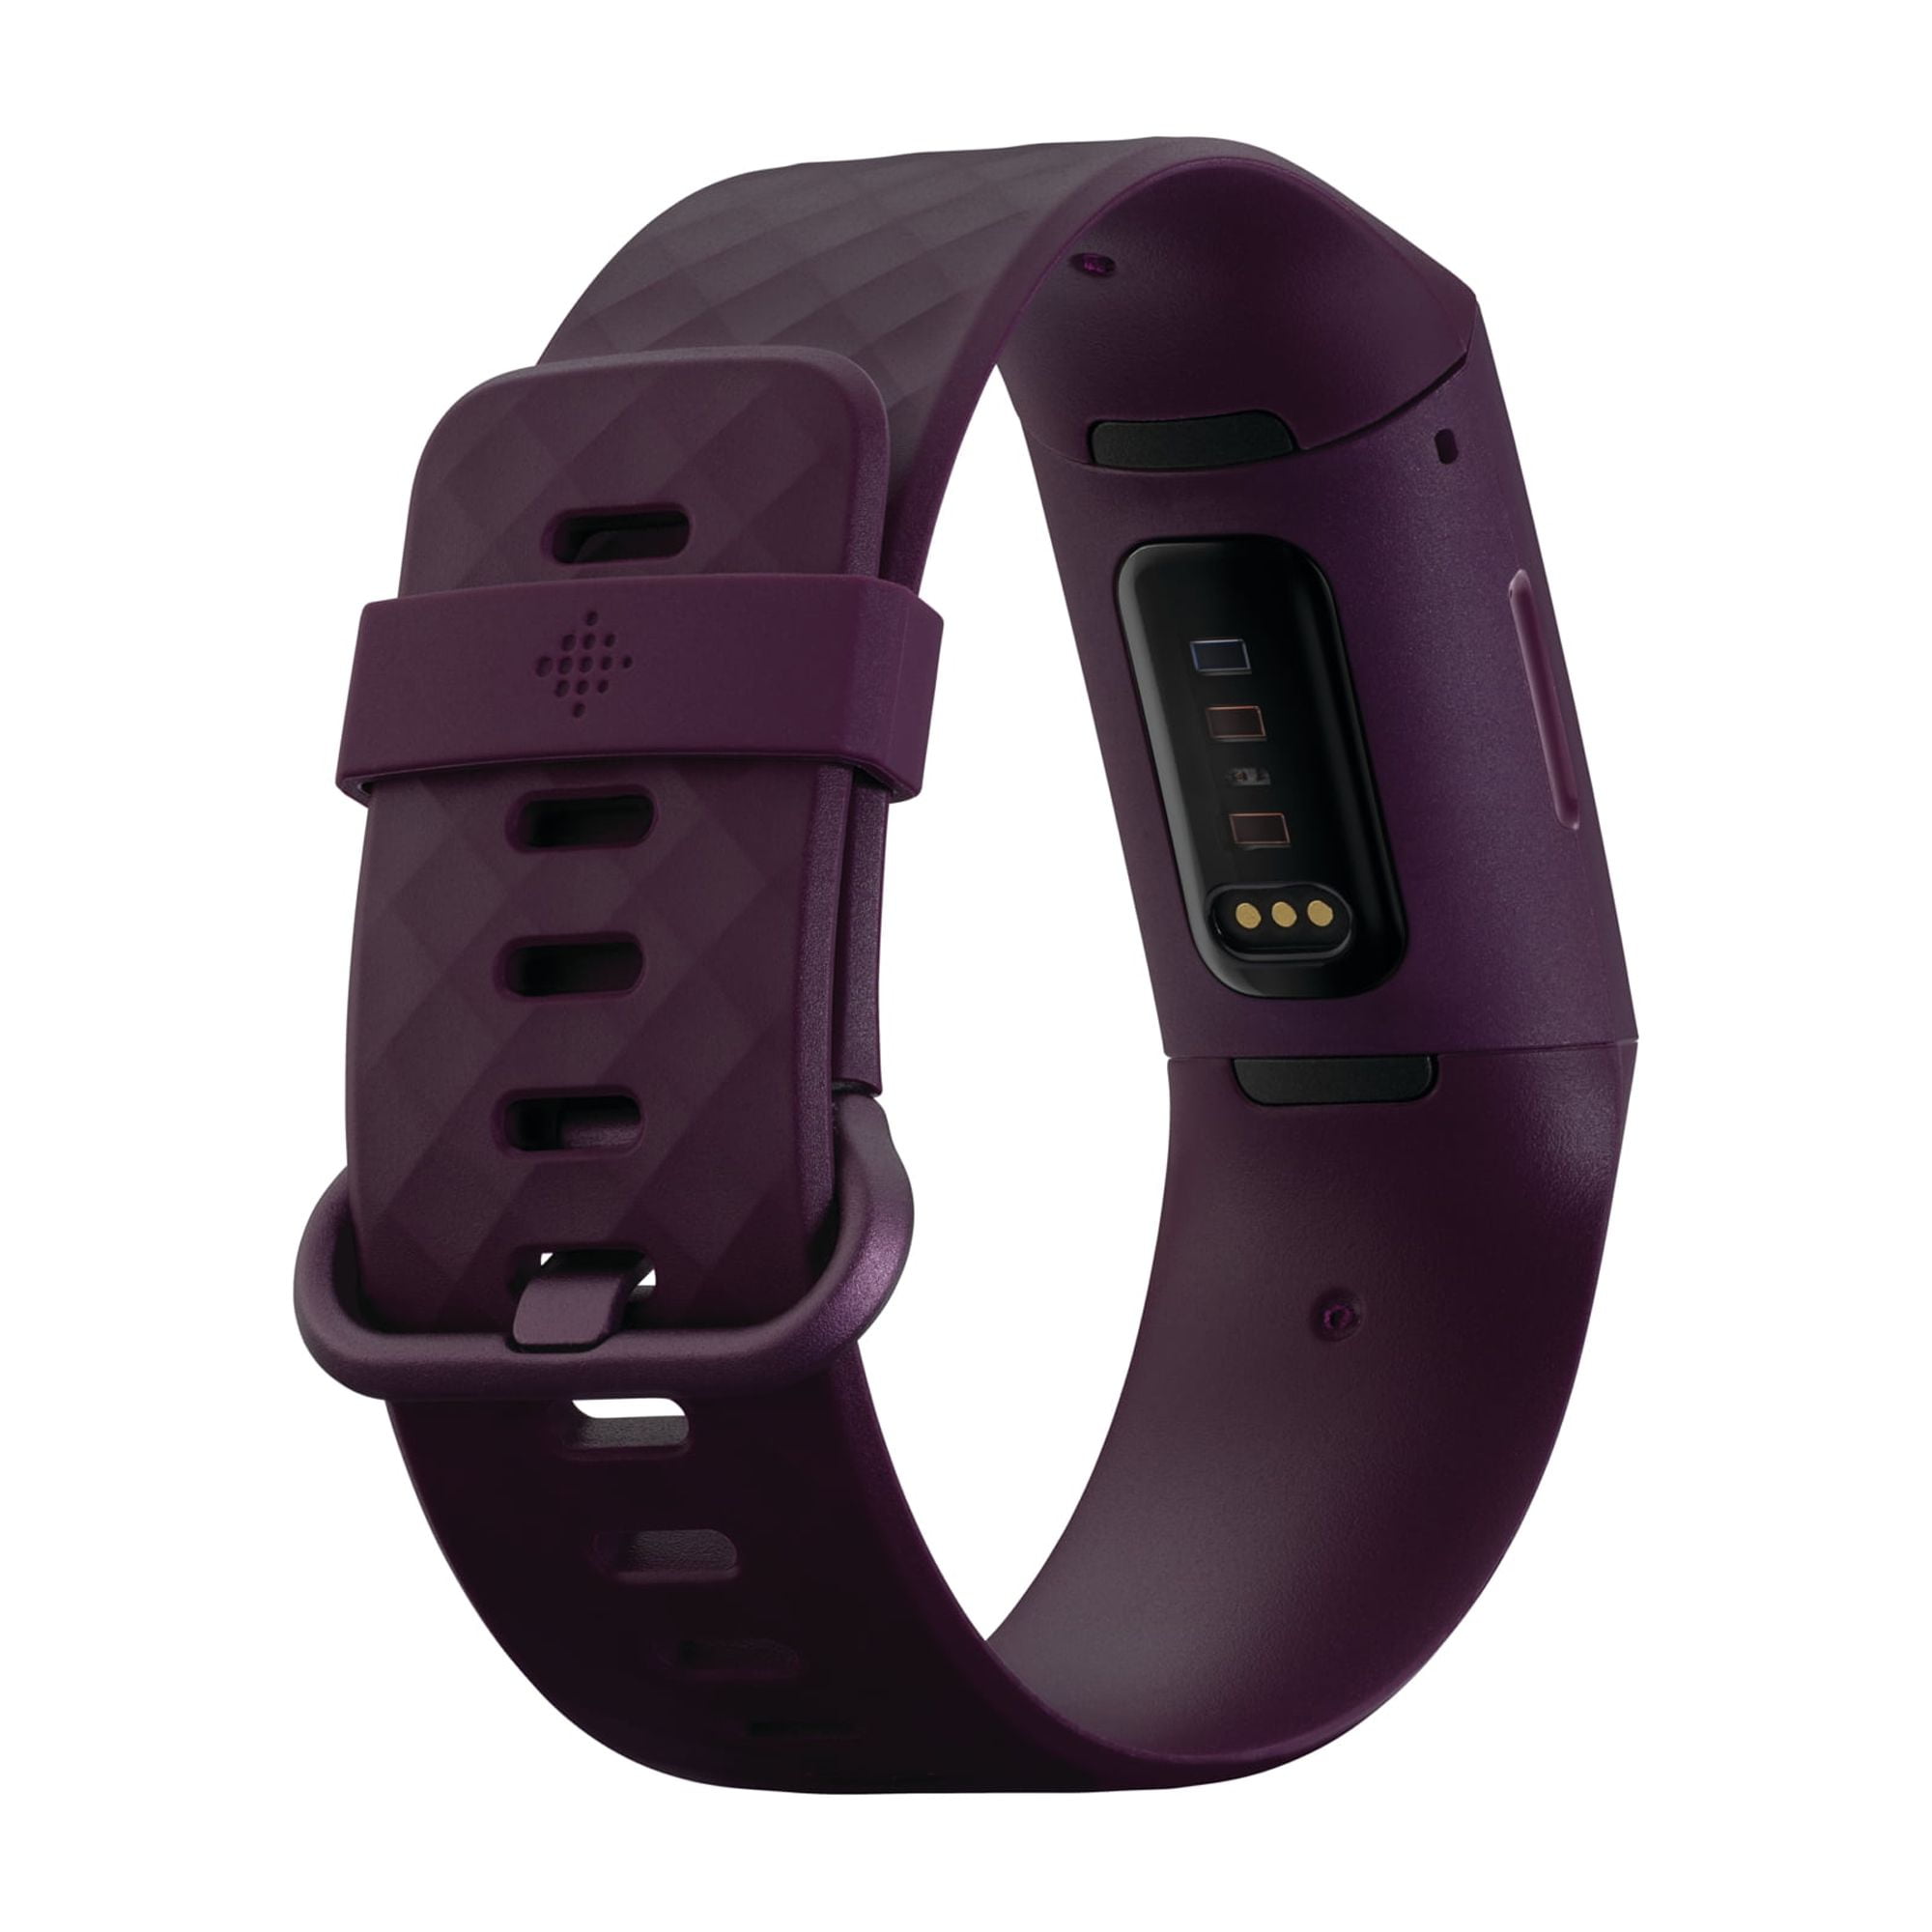  Fitbit Charge 4 Fitness and Activity Tracker with Built-in GPS,  Heart Rate, Sleep & Swim Tracking, Black/Black, One Size (S &L Bands  Included) : Sports & Outdoors